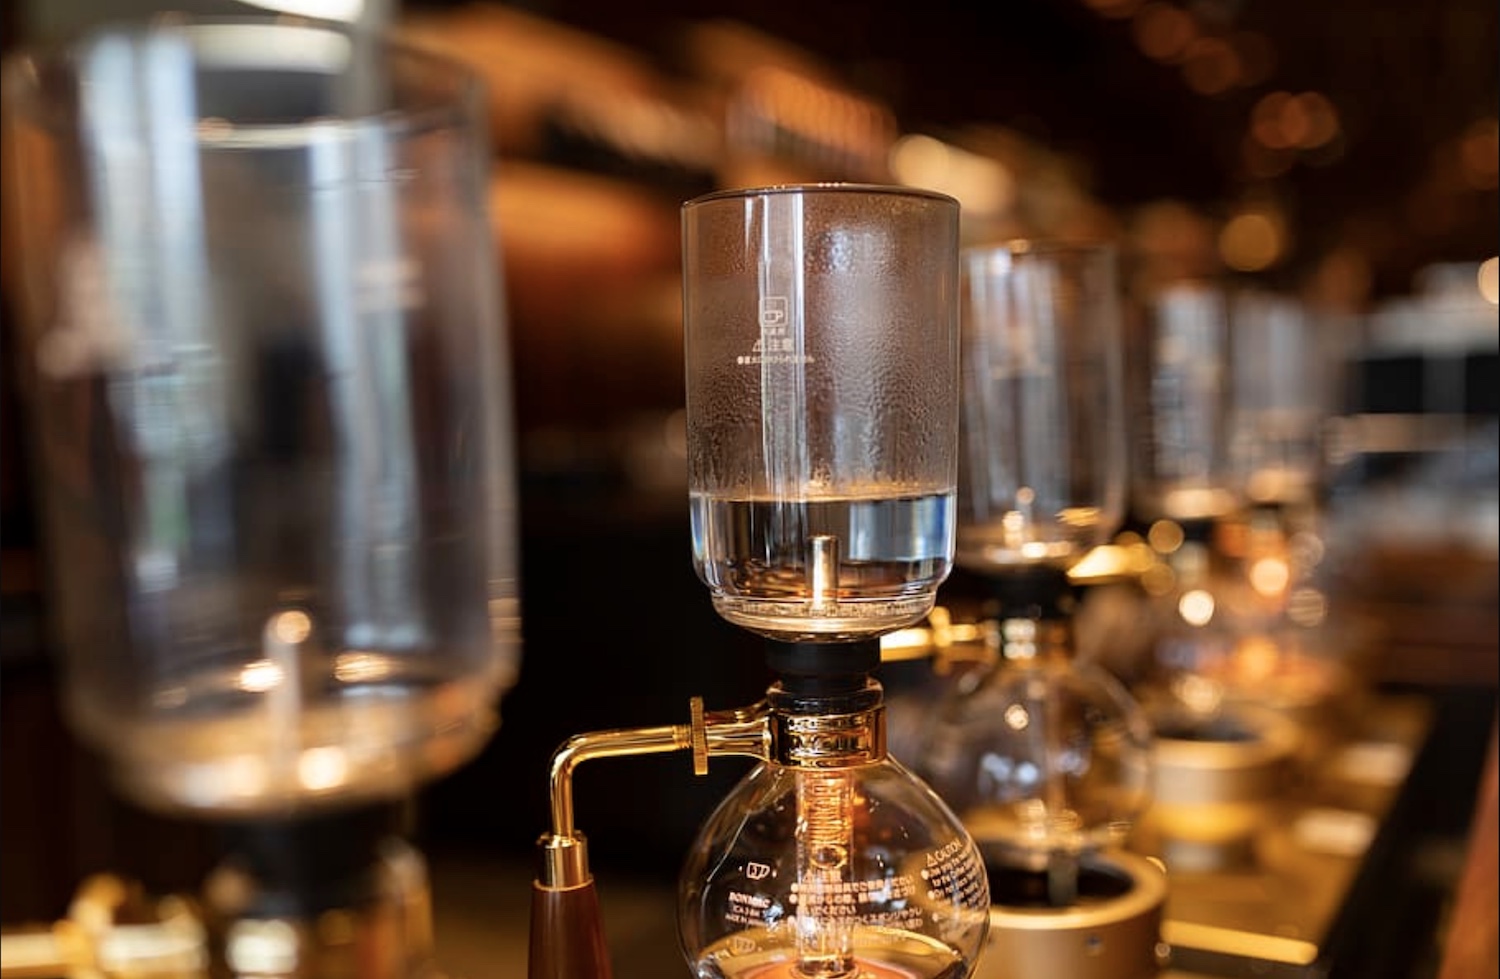 Brewing Siphon Coffee [History & Guide]